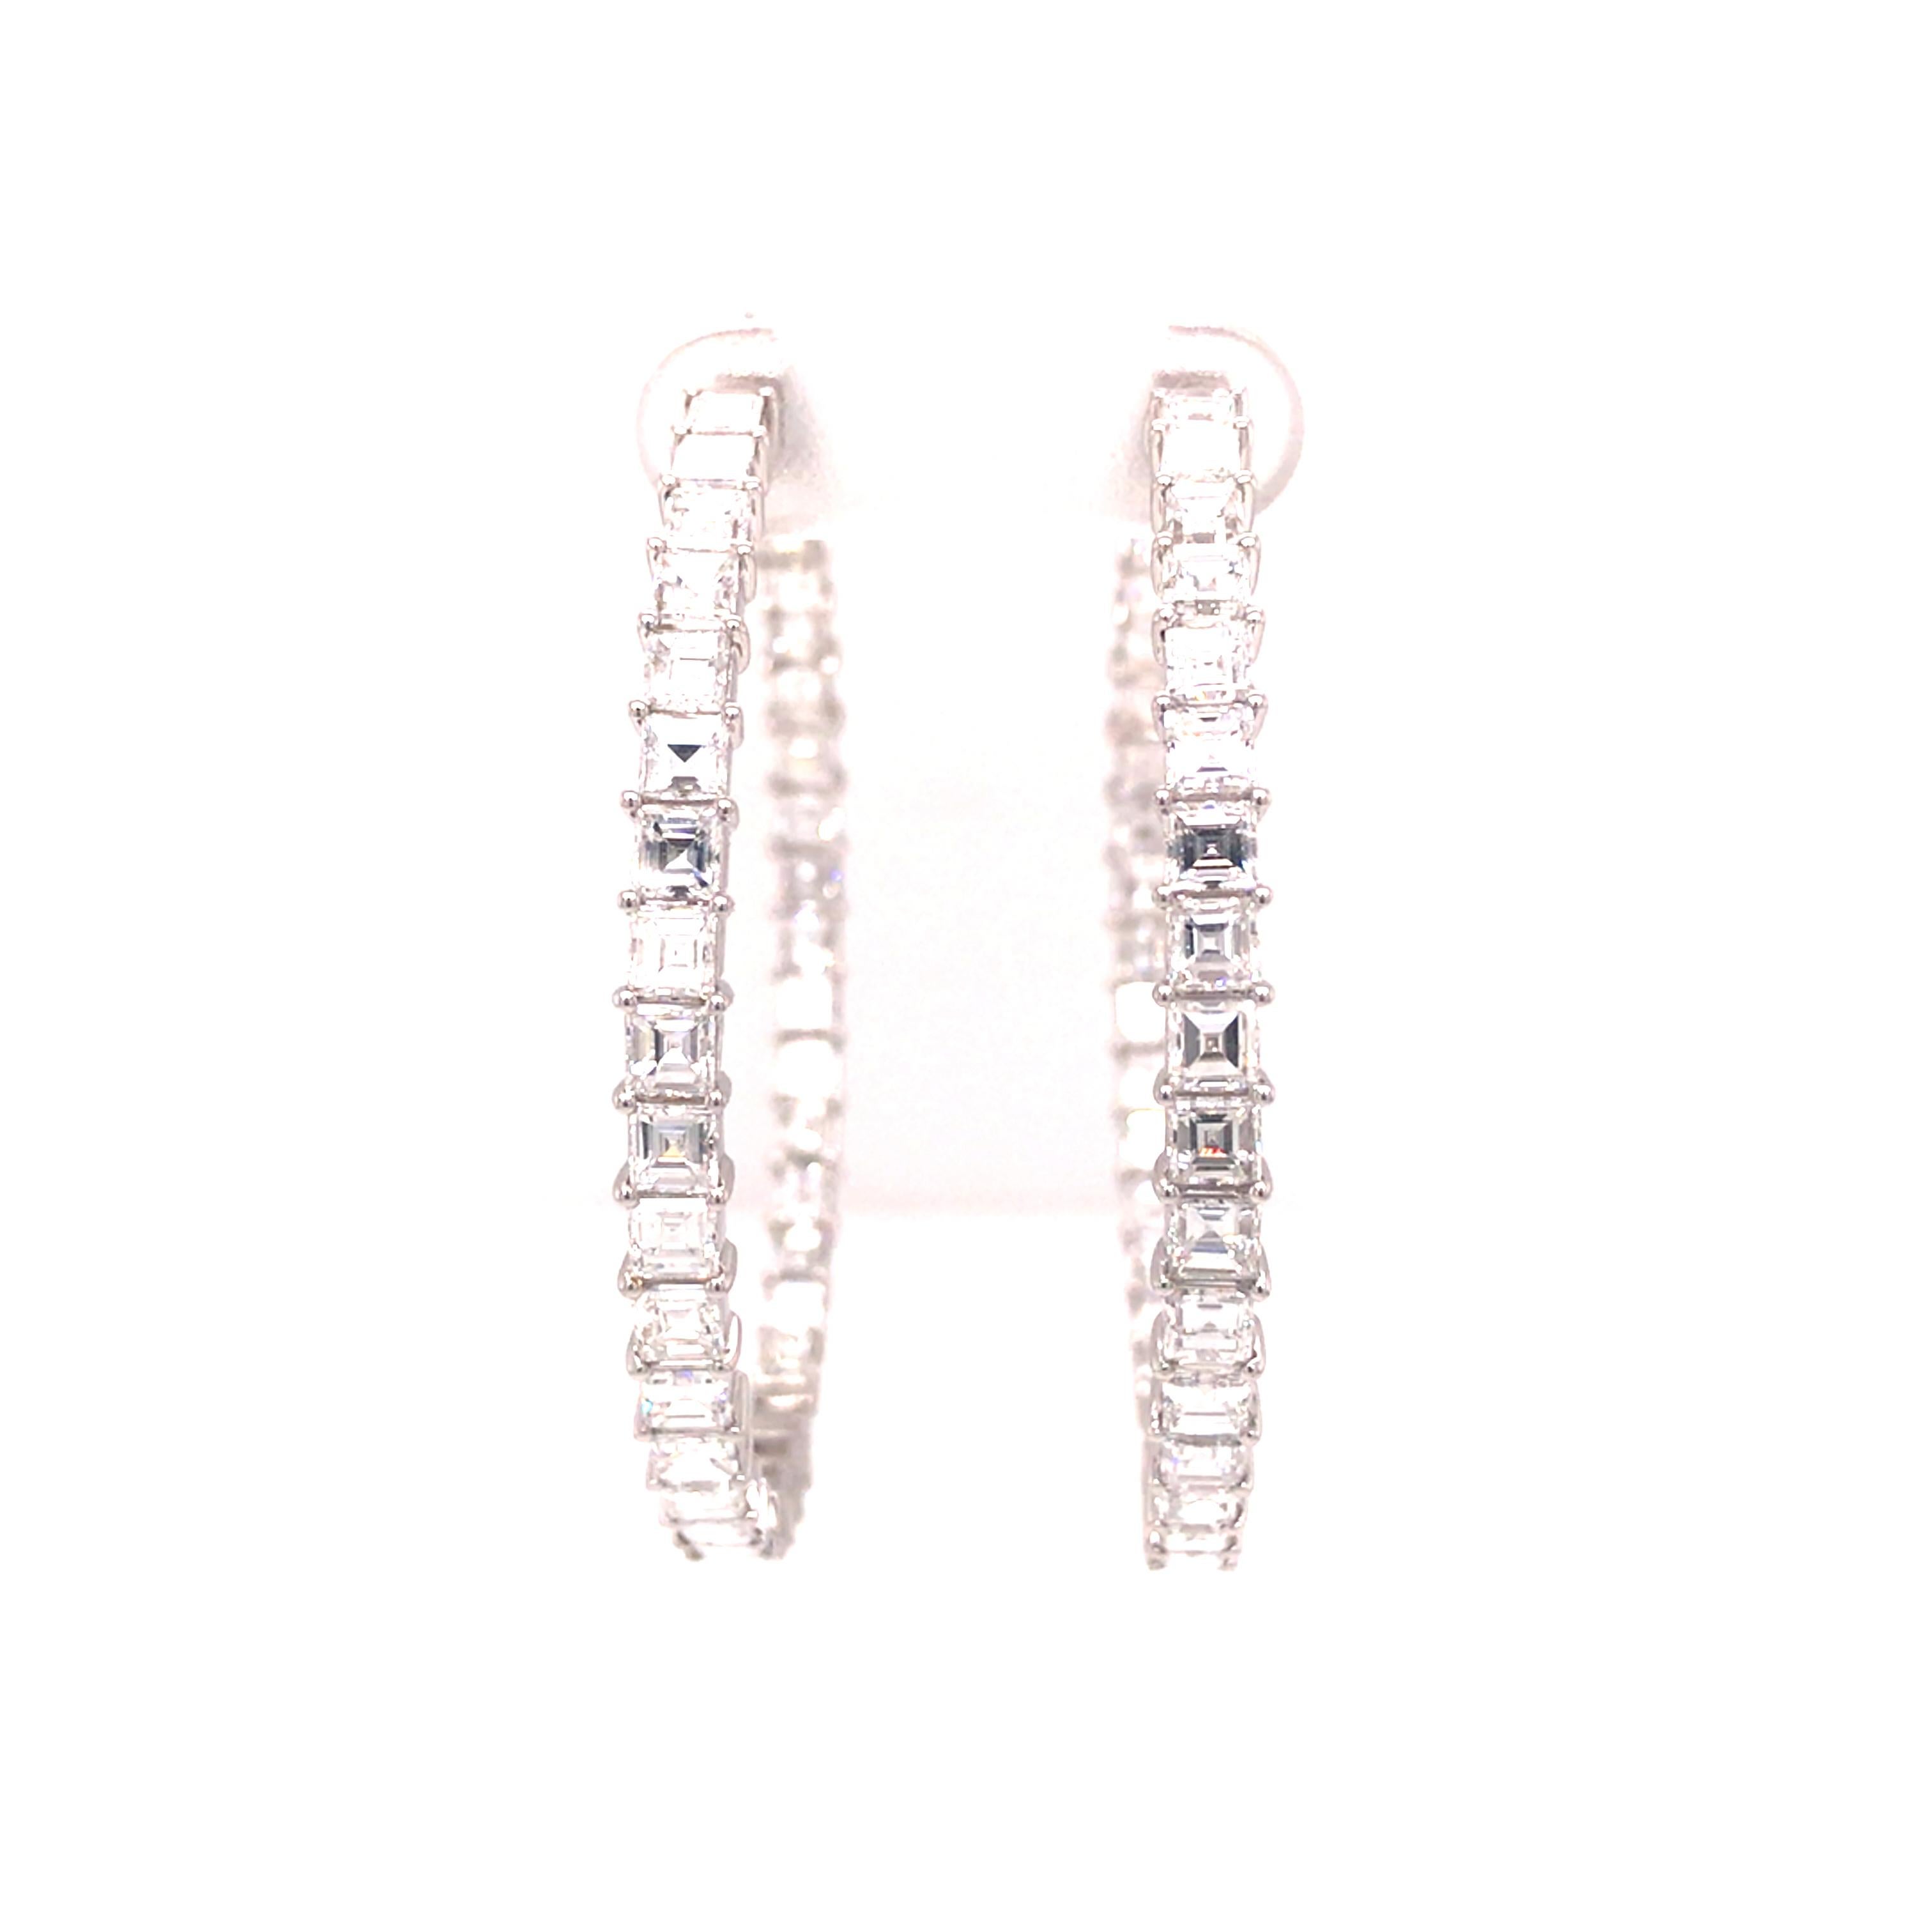 Emerald Diamond In/Out Hoop Earrings in 18K White Gold.  (58) Emerald Cut Diamonds weighing 6.75 carat total weight, G-H in color and VS-SI in clarity are expertly set.  The Earrings measure approximately 2 inch in length and 1/4 inch in width.